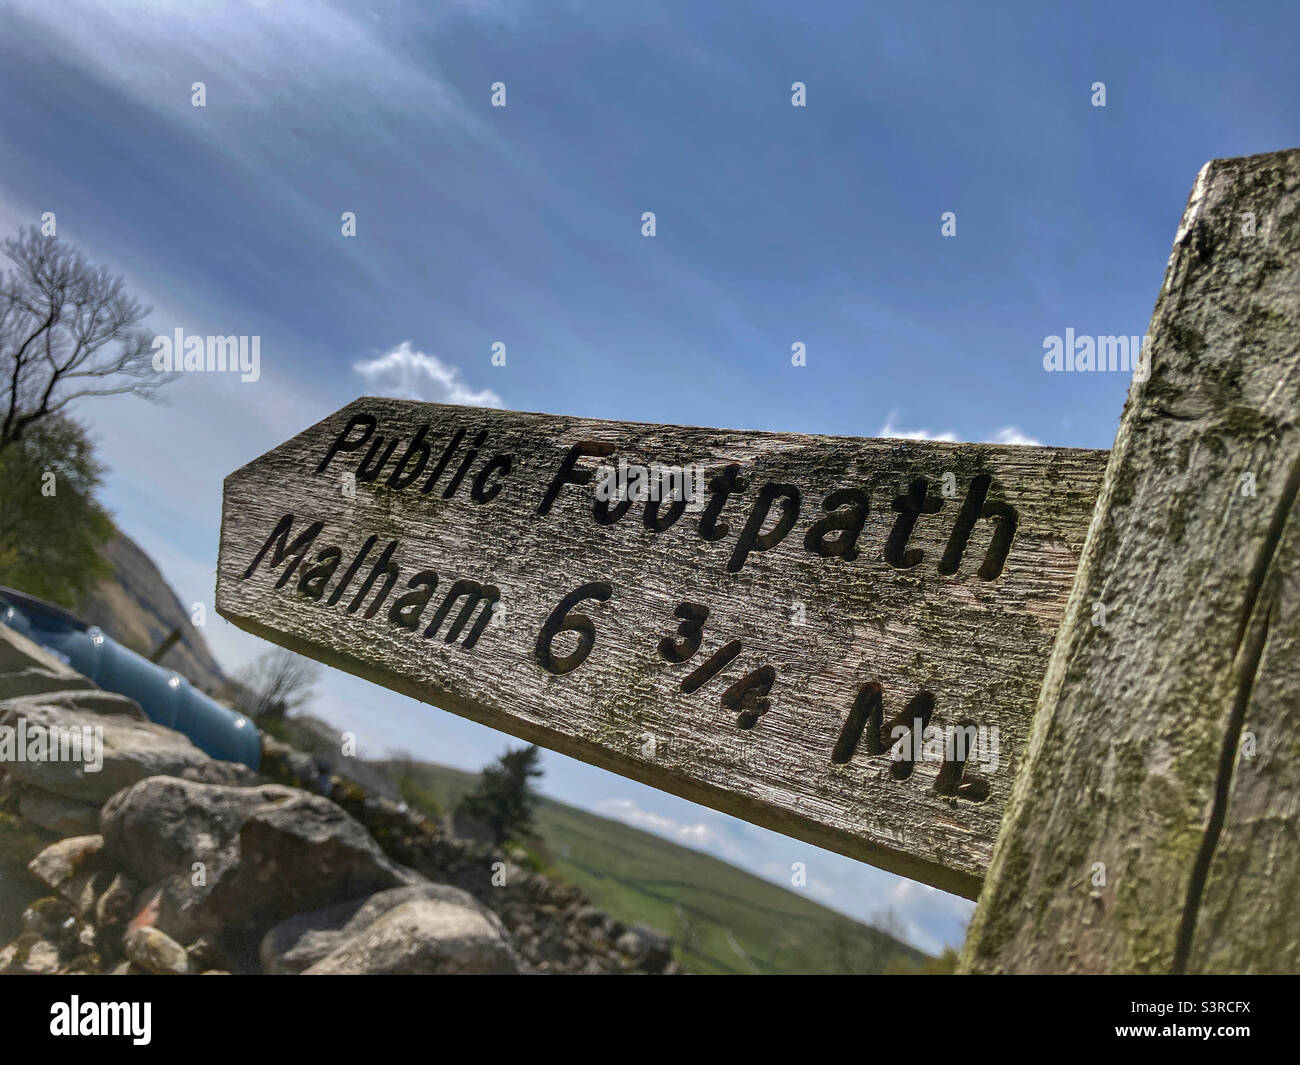 Public footpath sign to Malham Yorkshire Dales Stock Photo